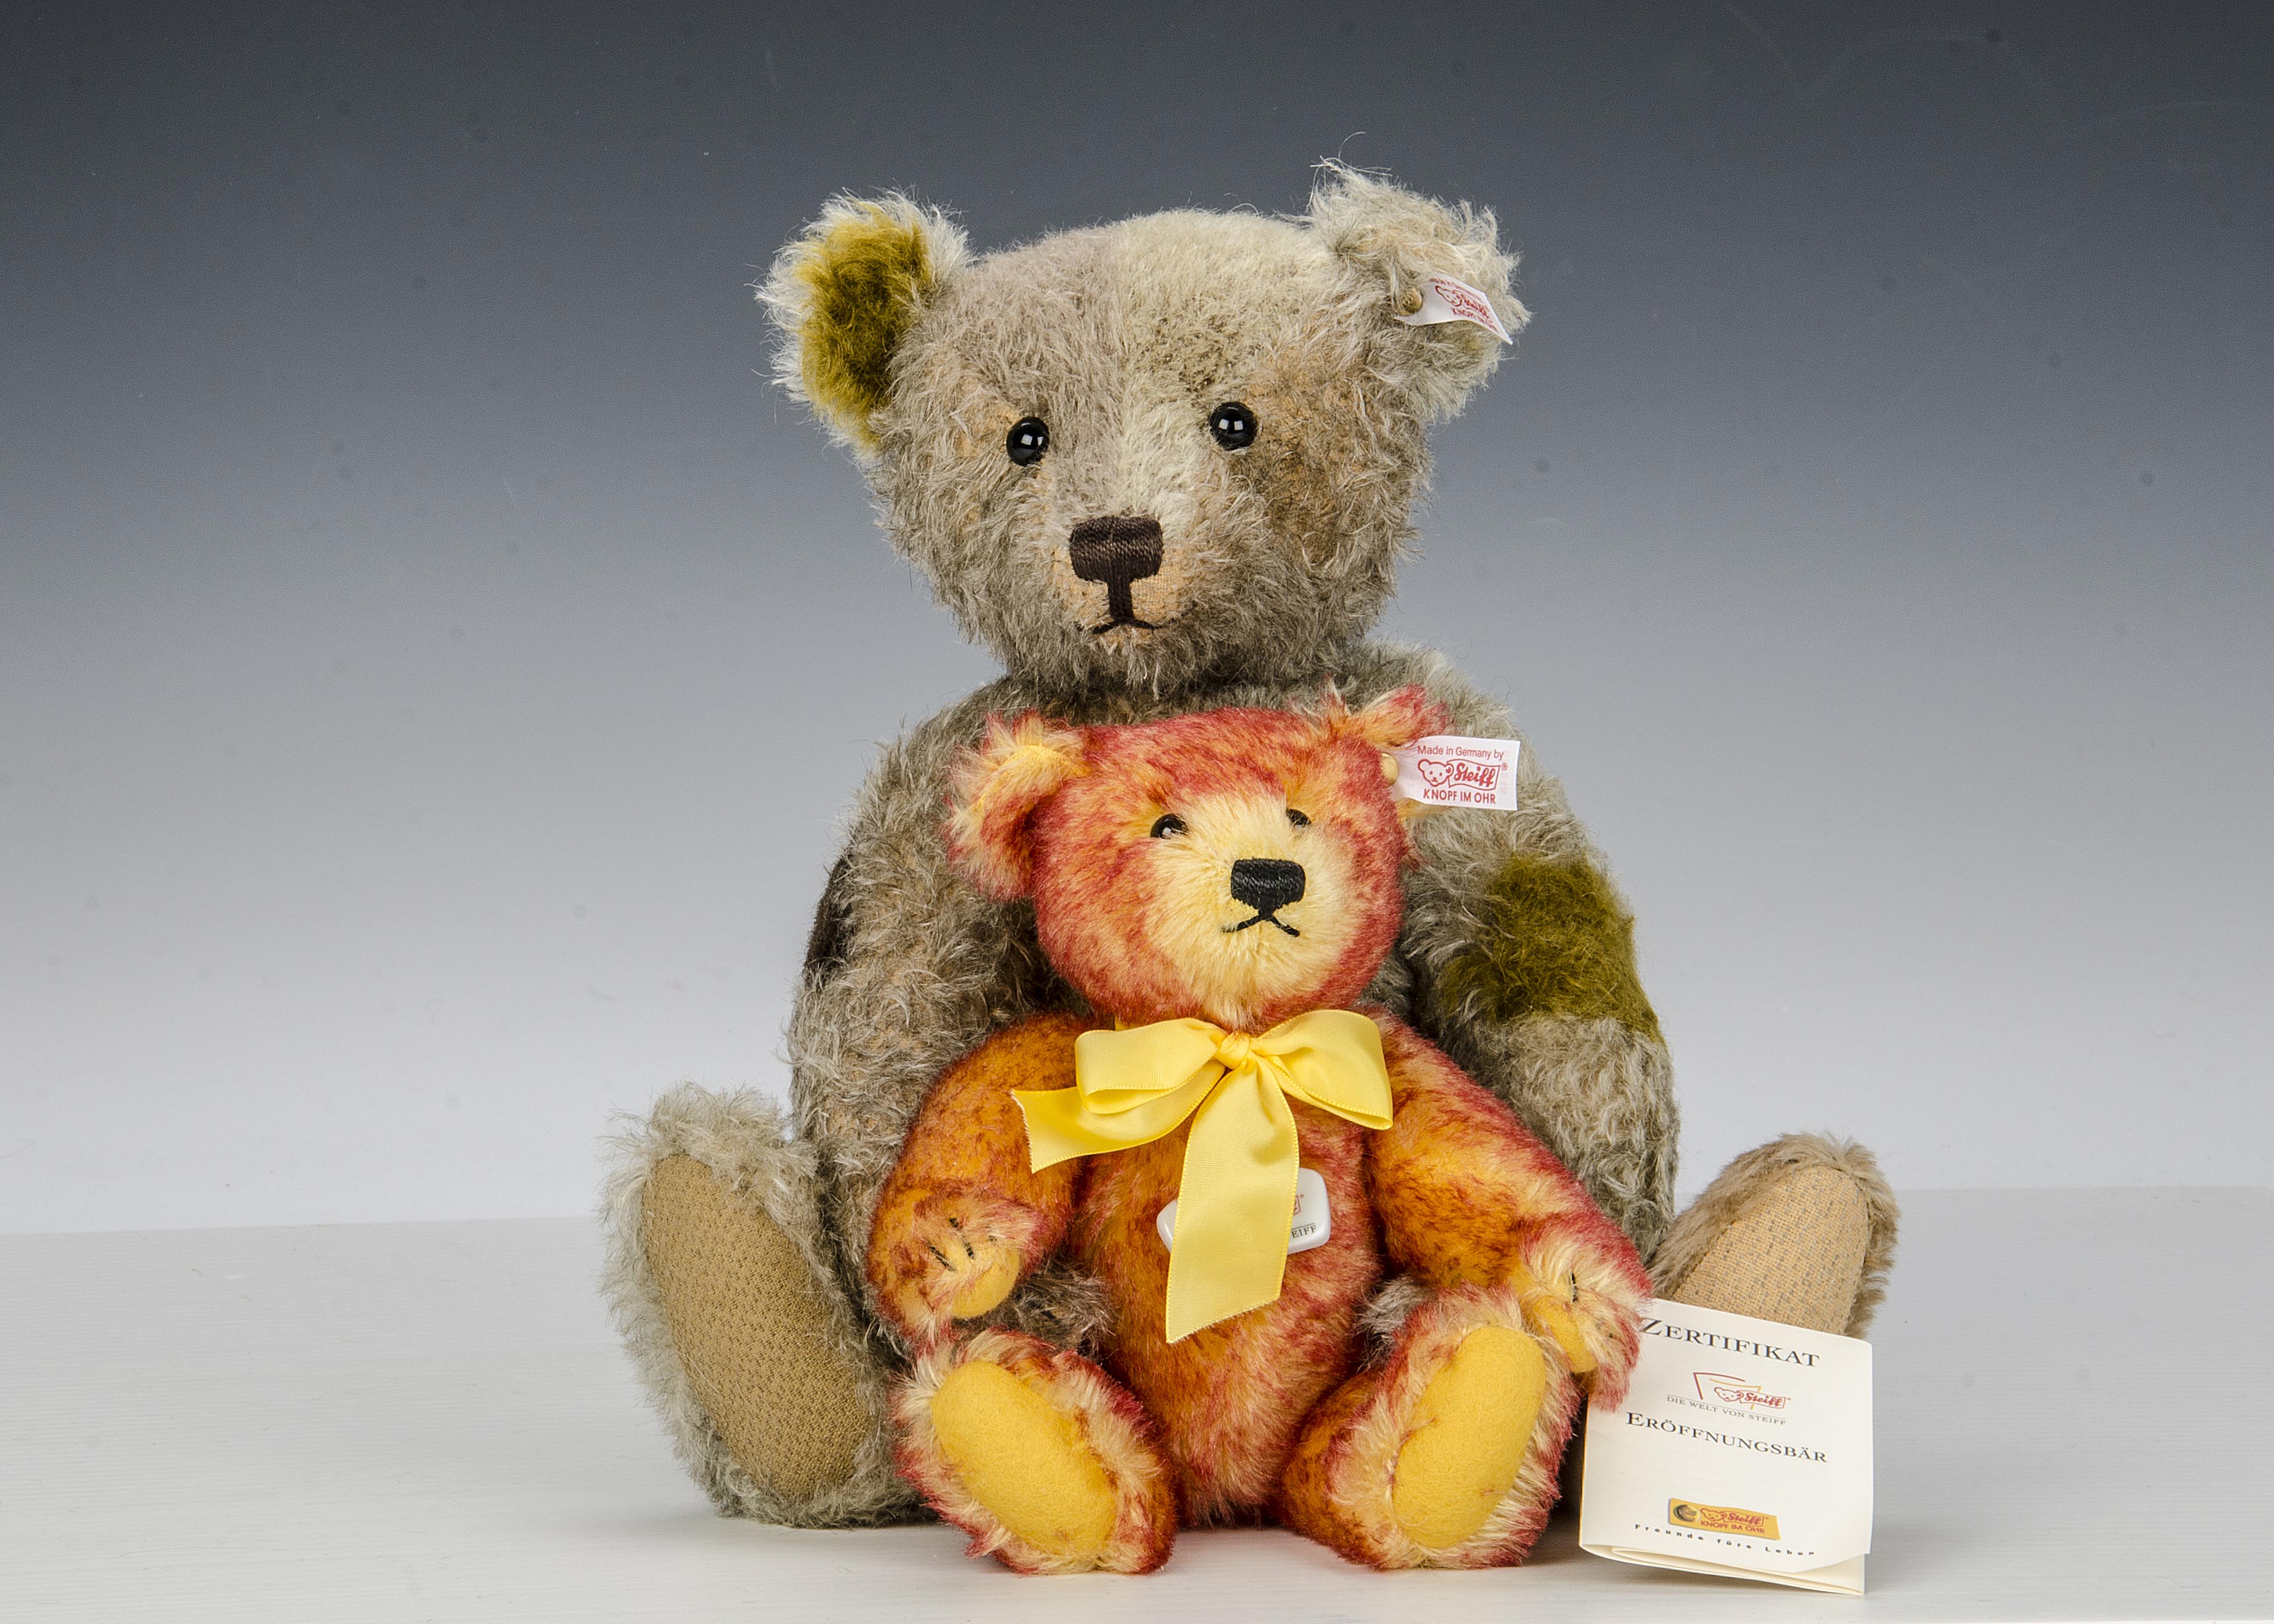 A Steiff Limited Edition Reinhard The Schulte Patchwork Teddy Bear, 334 of 1901, in original box